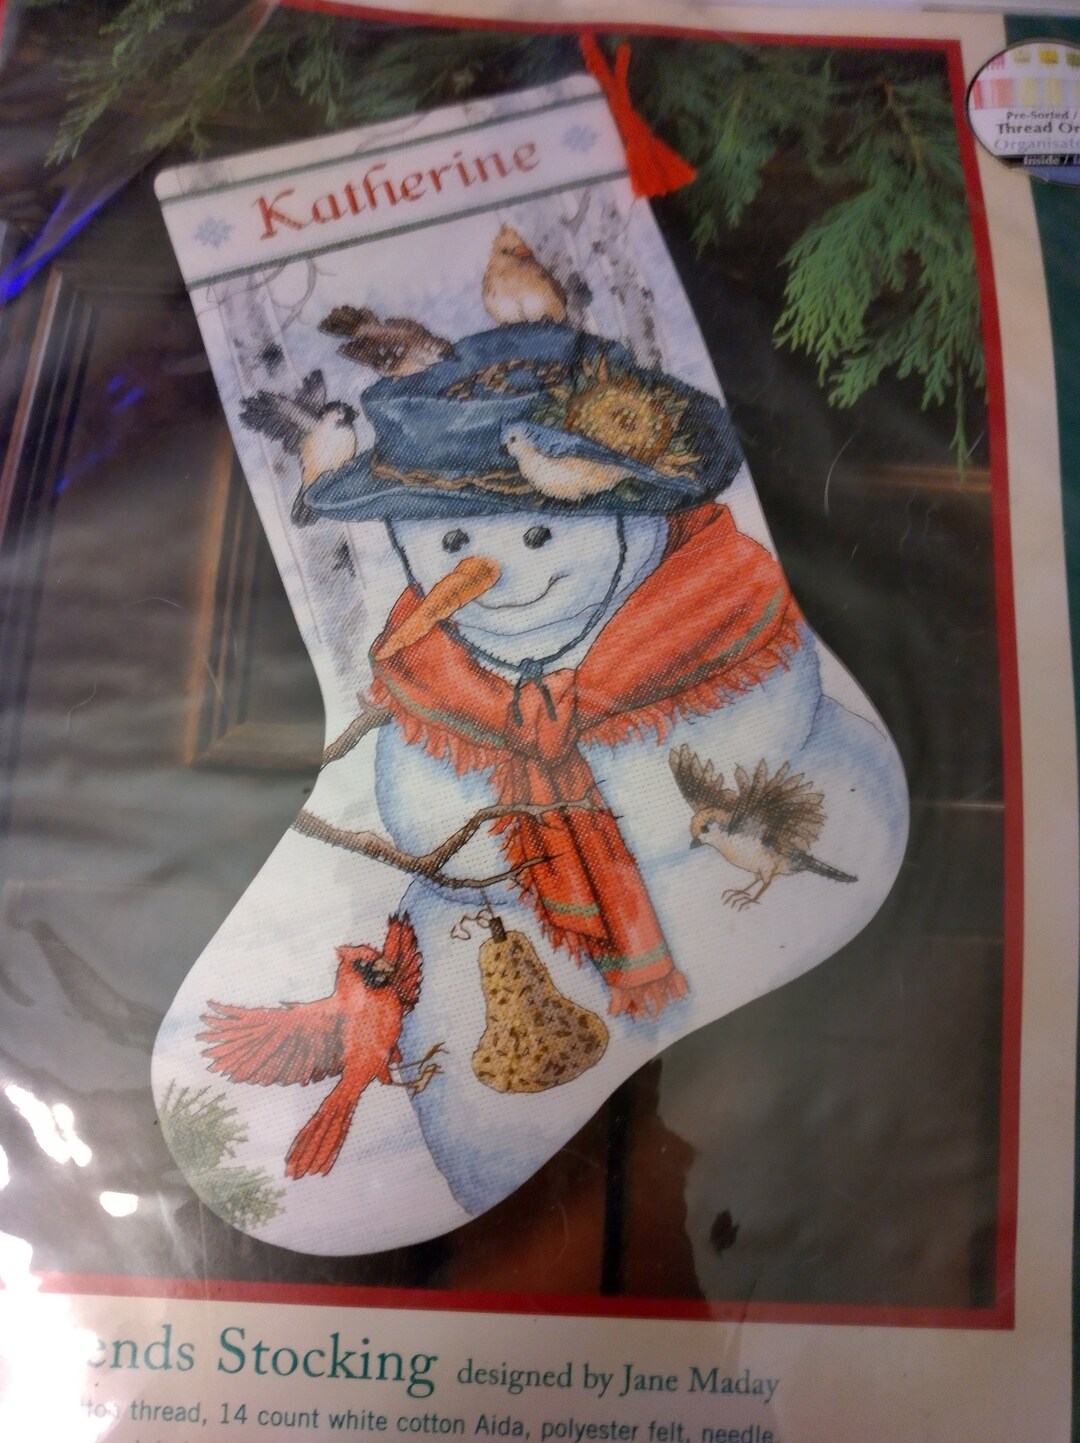 Country Stitching Stocking Surprises Complete set of 3Stamped